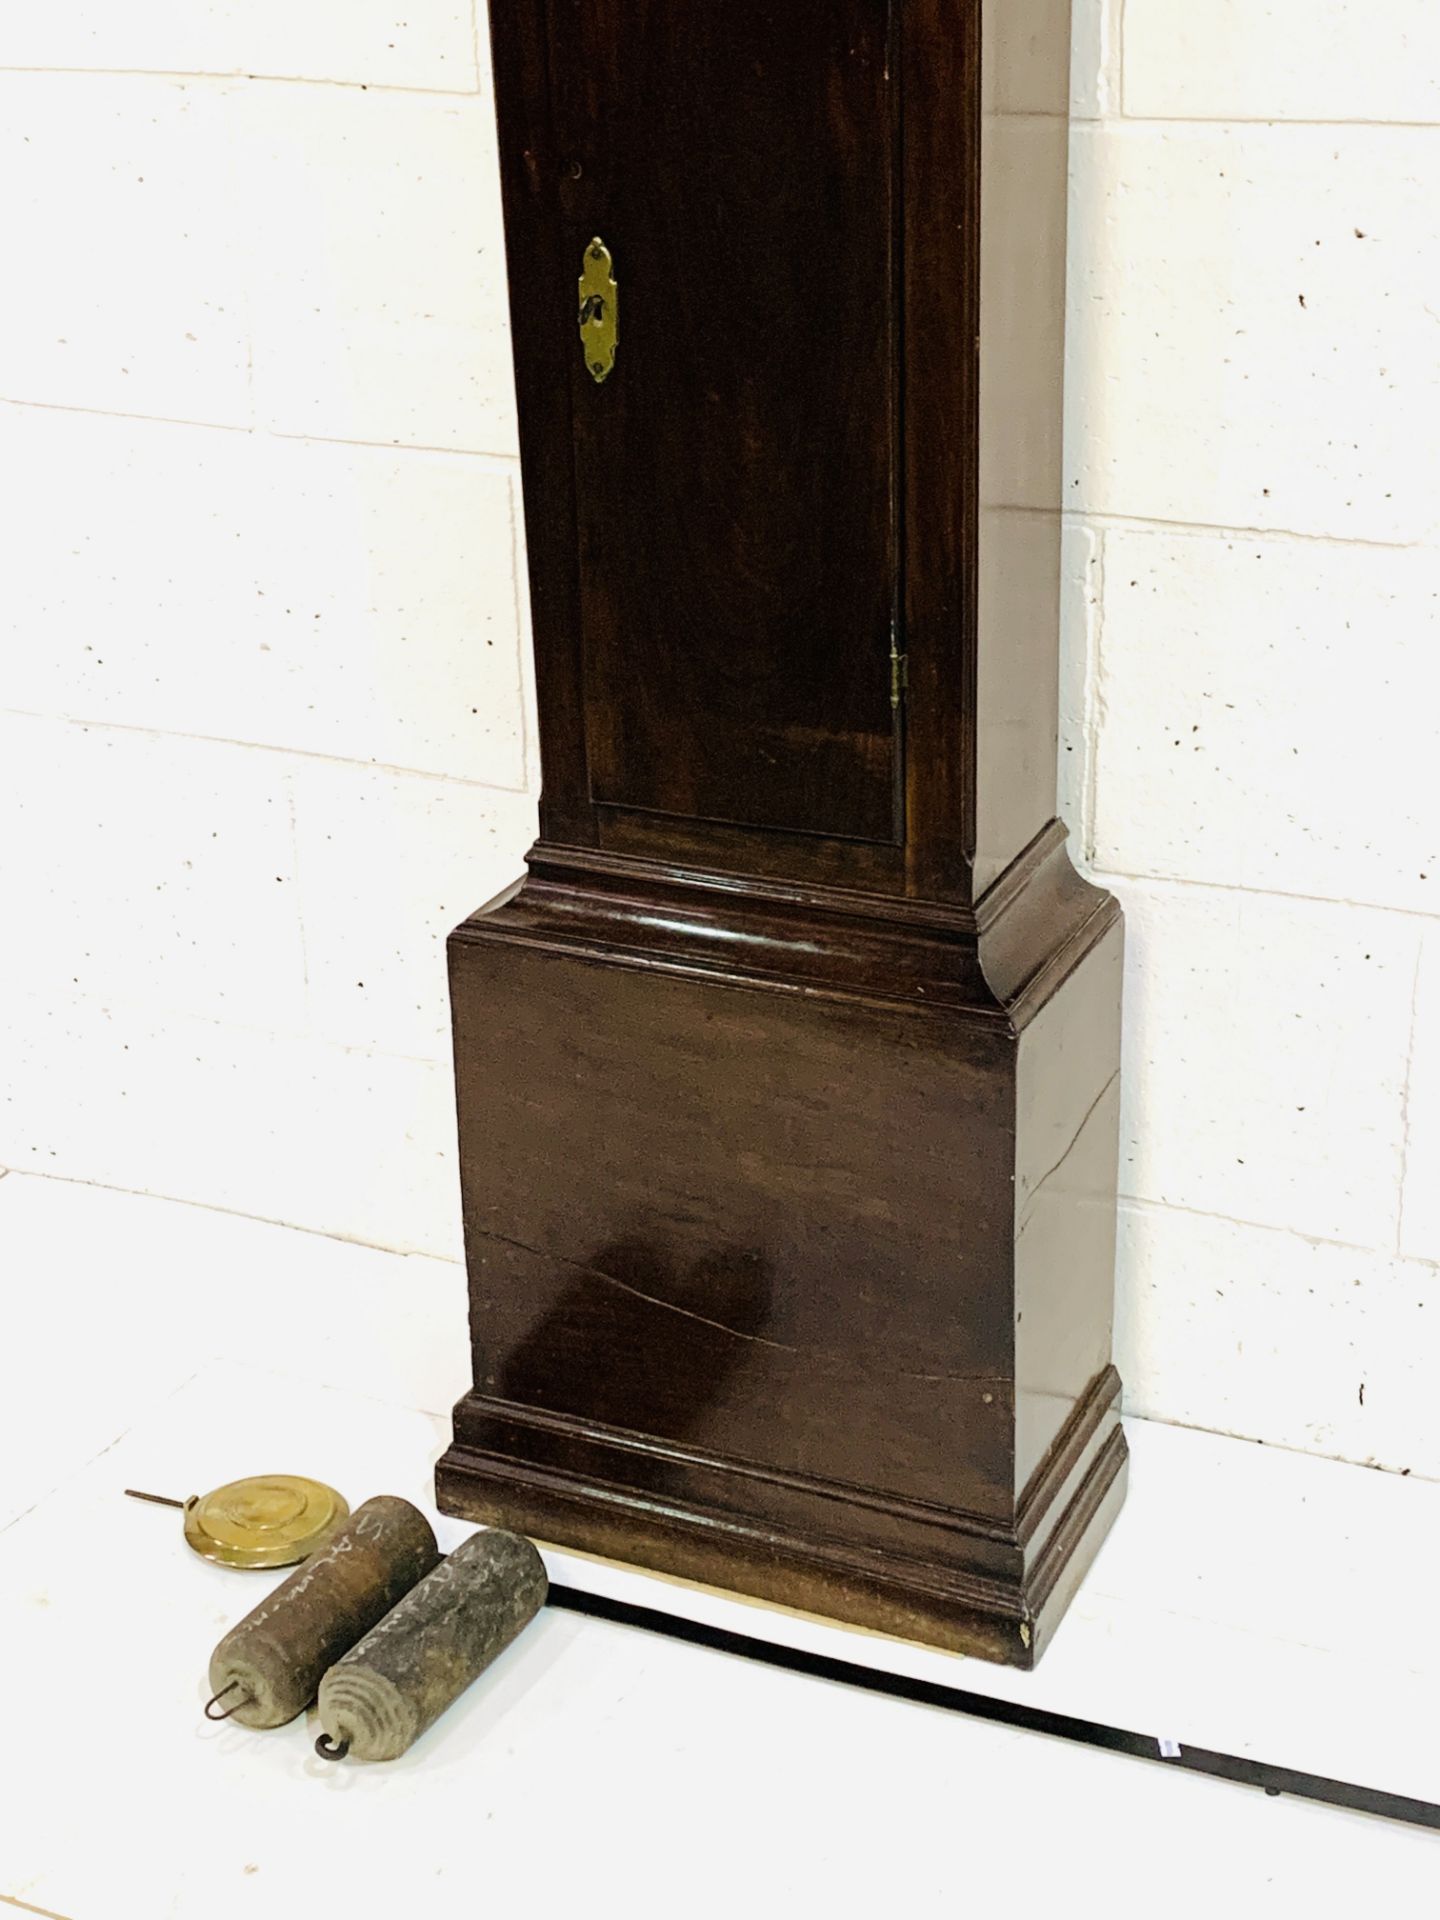 Mahogany long case clock with columned and arched hood by Jos. Leyton of Portsmouth - Image 3 of 9